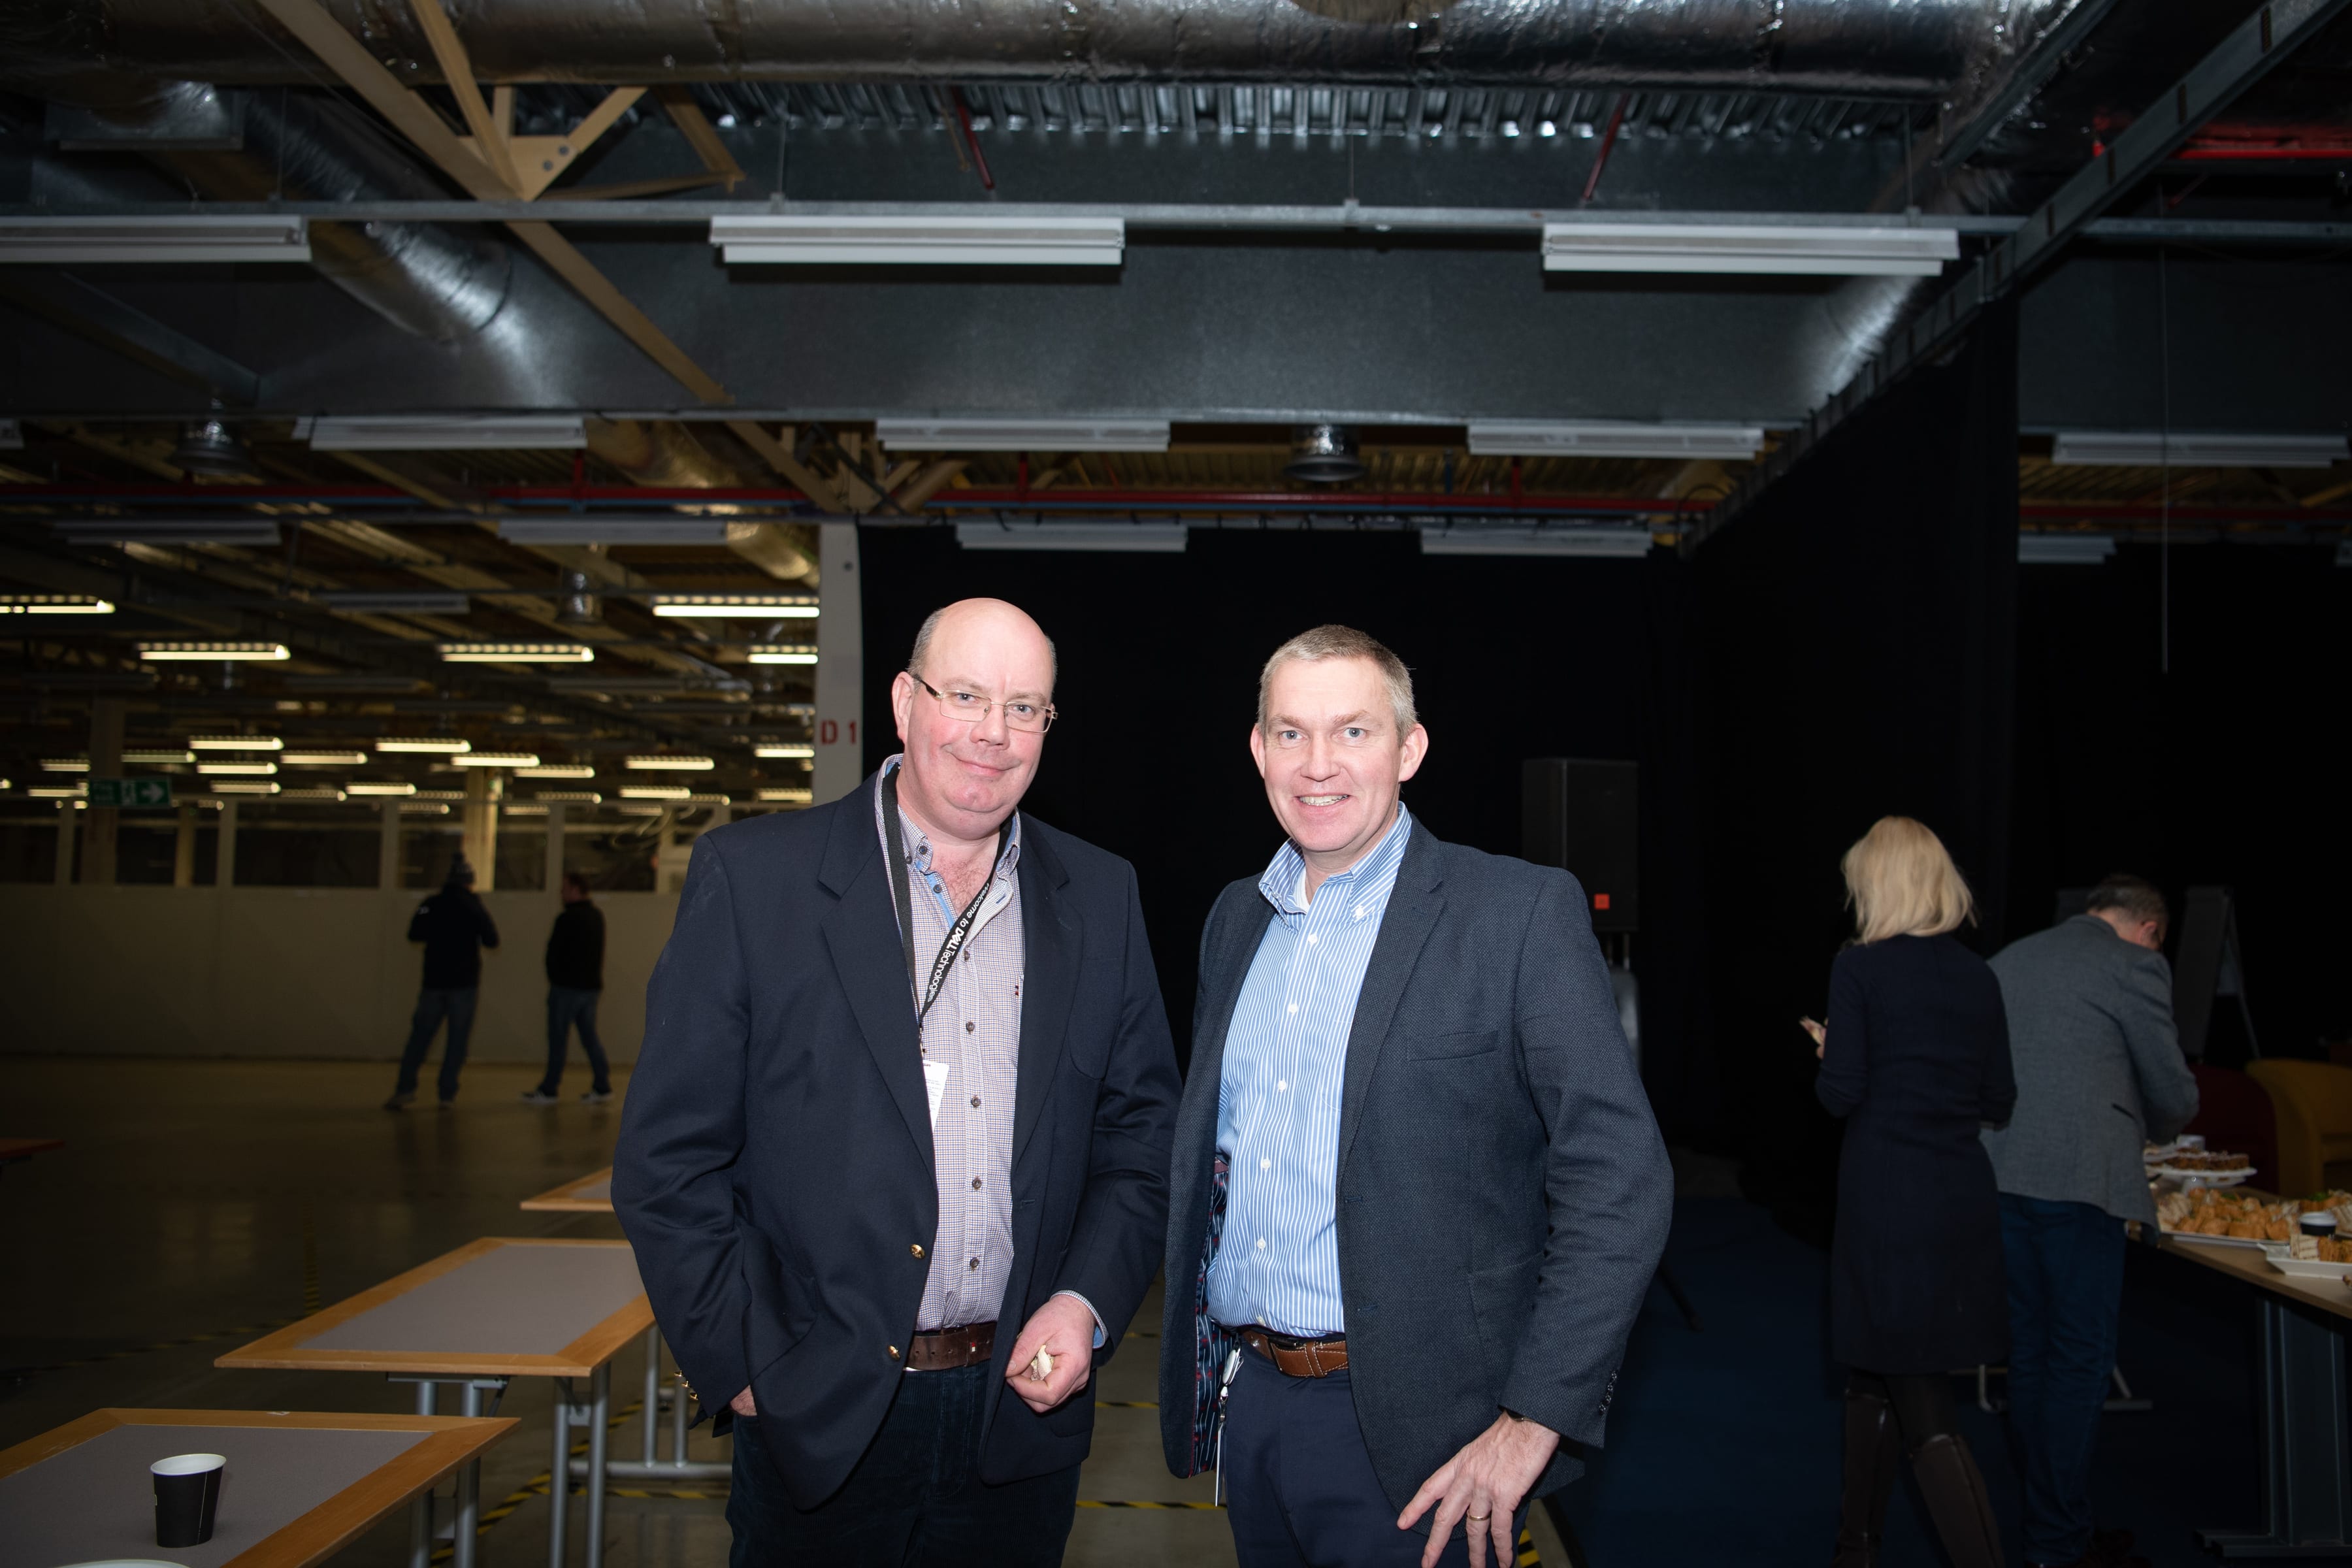 No repro fee- Regional Leaders Programme which took place on 11 December in Dell EMC, Guest speaker Eleanor McEvoy - From Left to Right: DJ White - CD Stores, Sean O’Reilly - EMEA VP of Logistics at Dell Technologies
Photo credit Shauna Kennedy